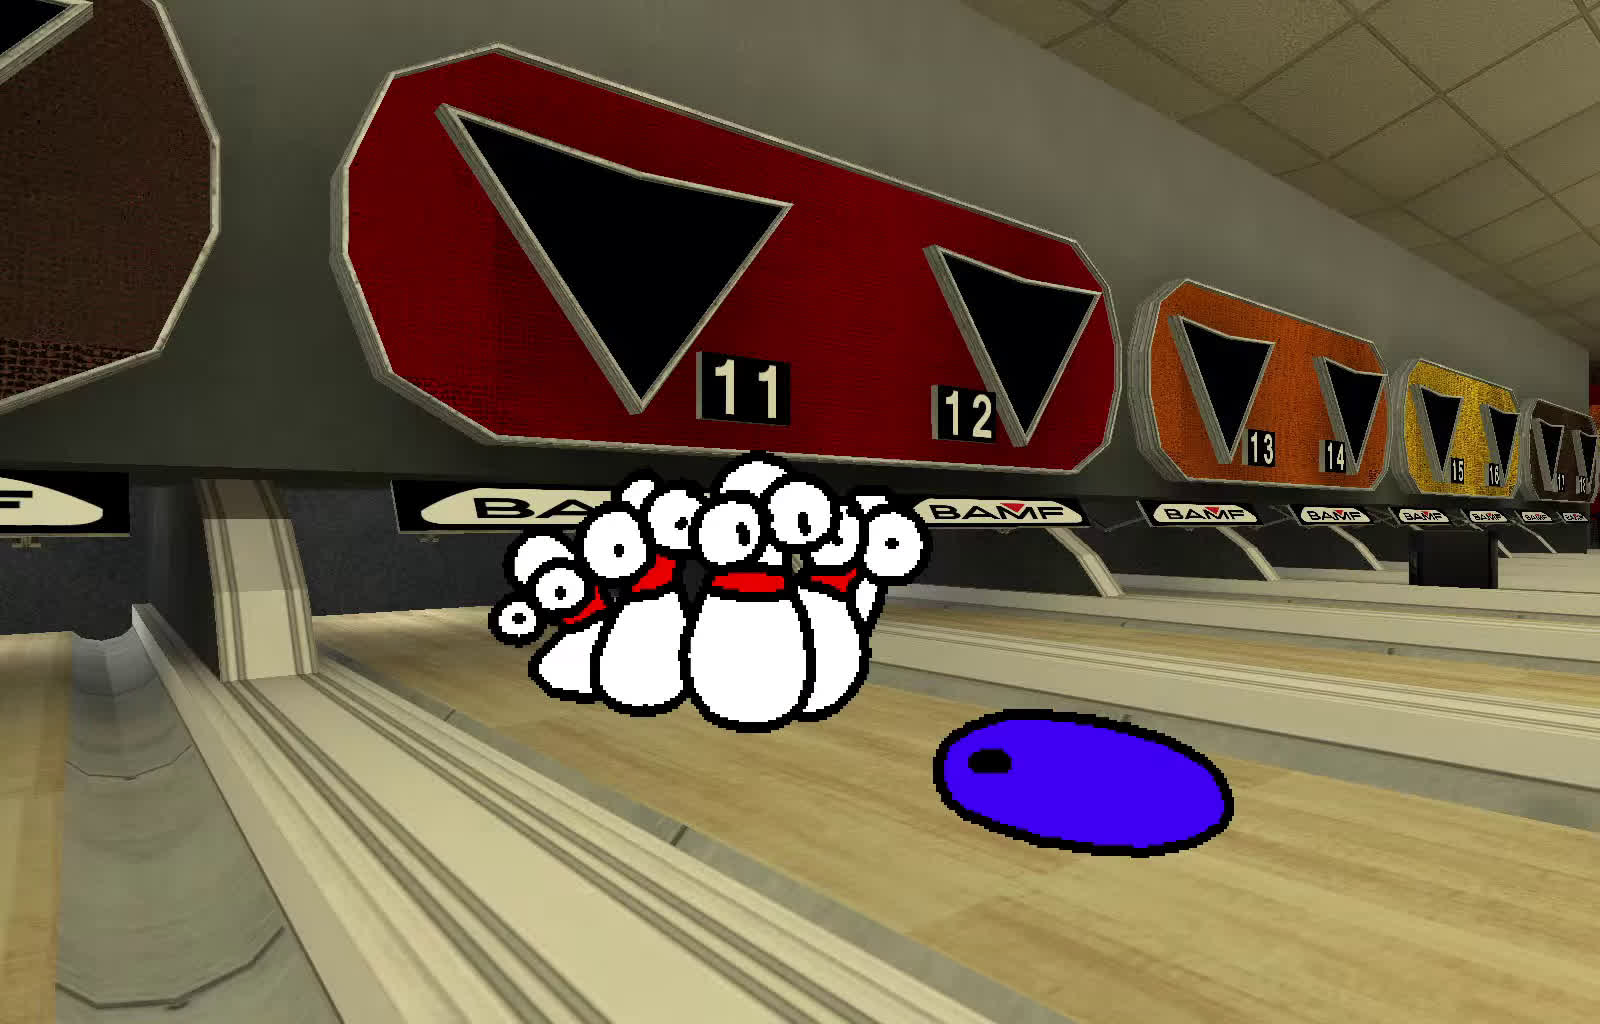 Bowling alley screen porn